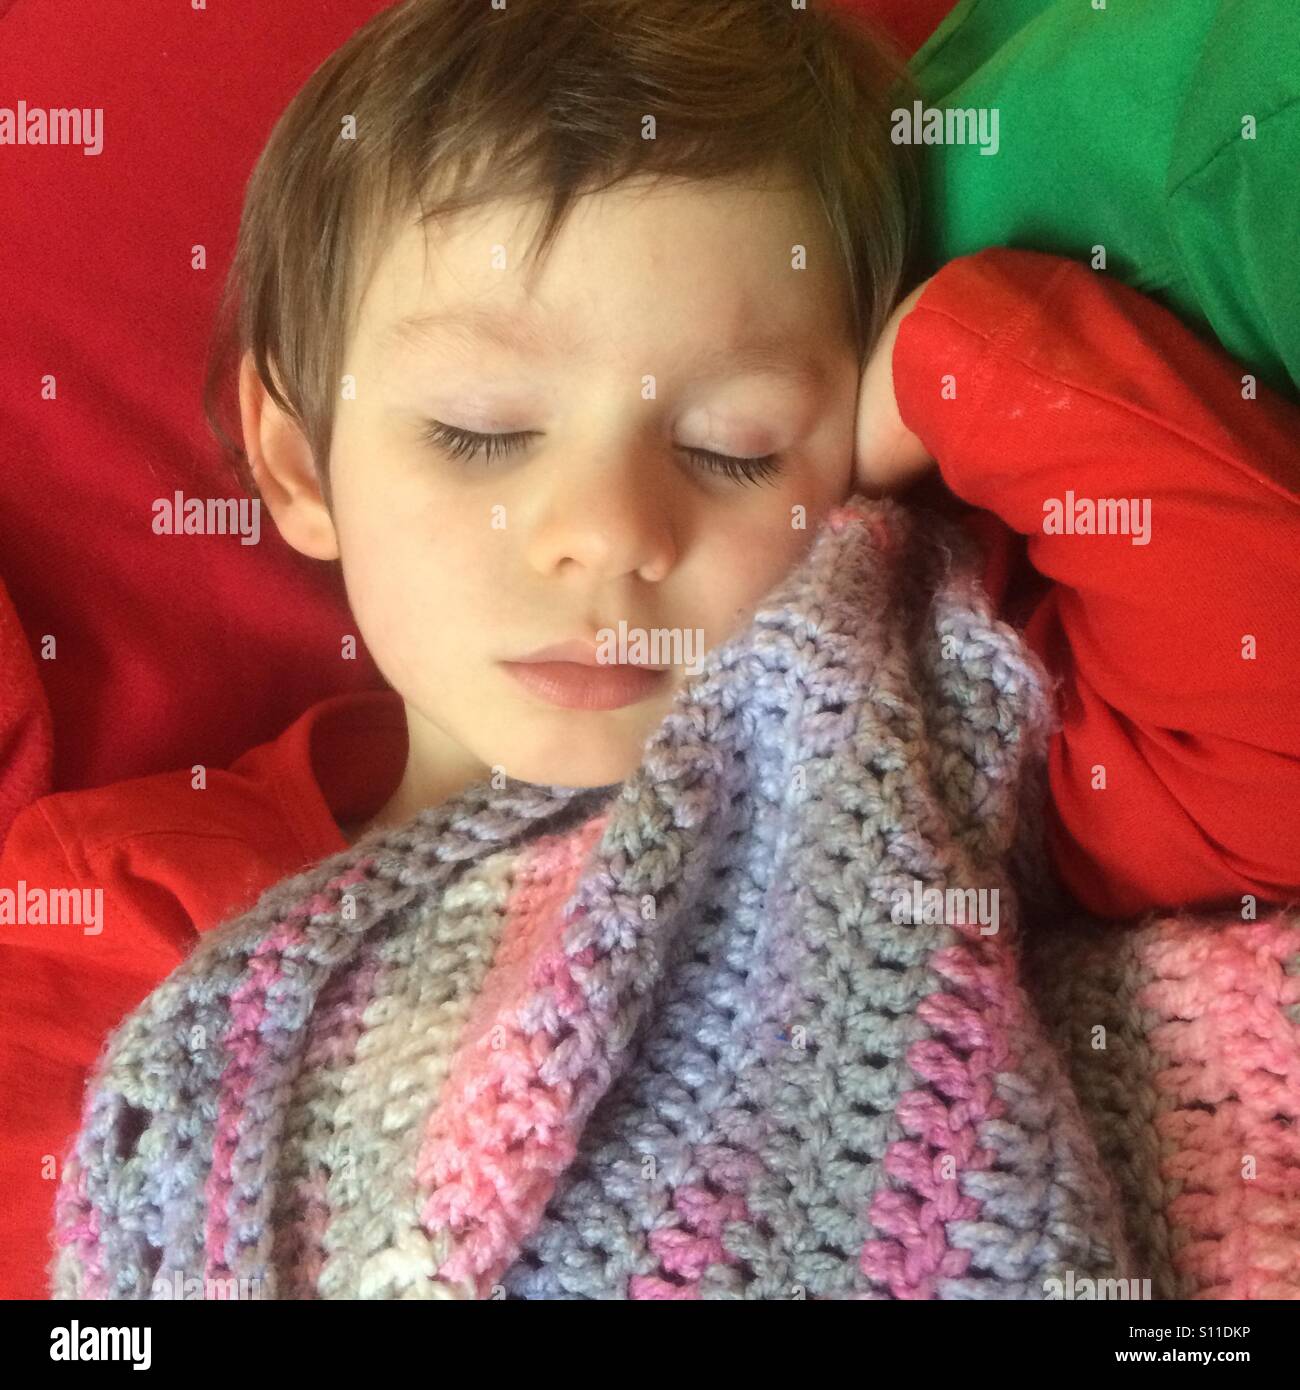 Young boy child sleeping peacefully with a crochet blanket. He is wearing a colourful red t-shirt and is taking his nap on a red and green cushion. He is snuggled up to a handmade crochet throw. Stock Photo